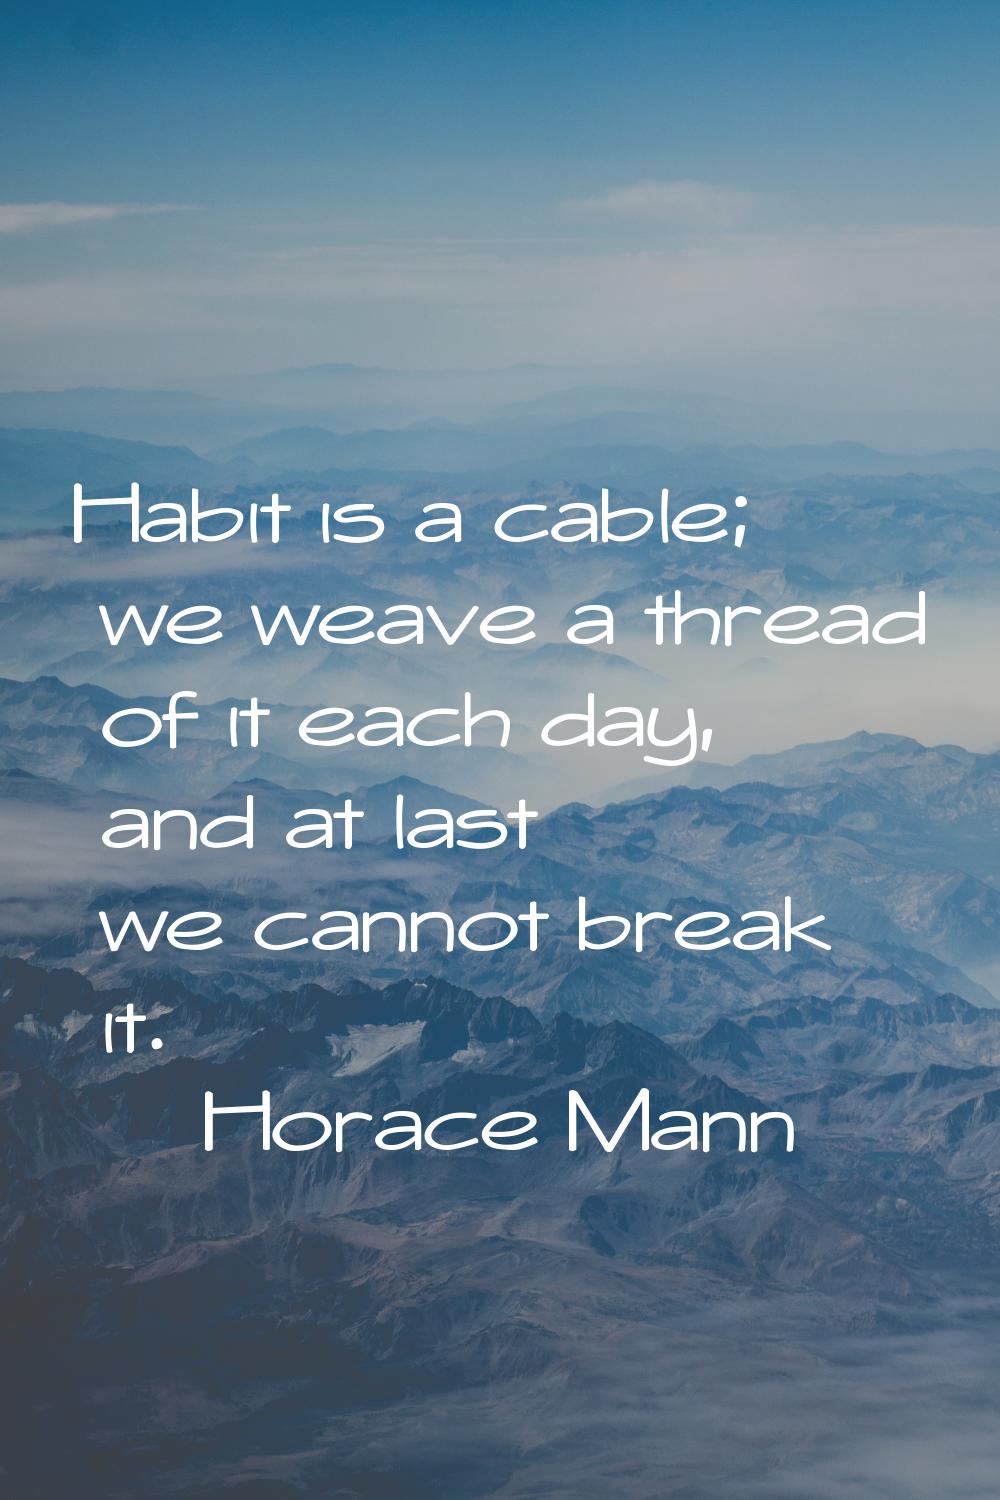 Habit is a cable; we weave a thread of it each day, and at last we cannot break it.